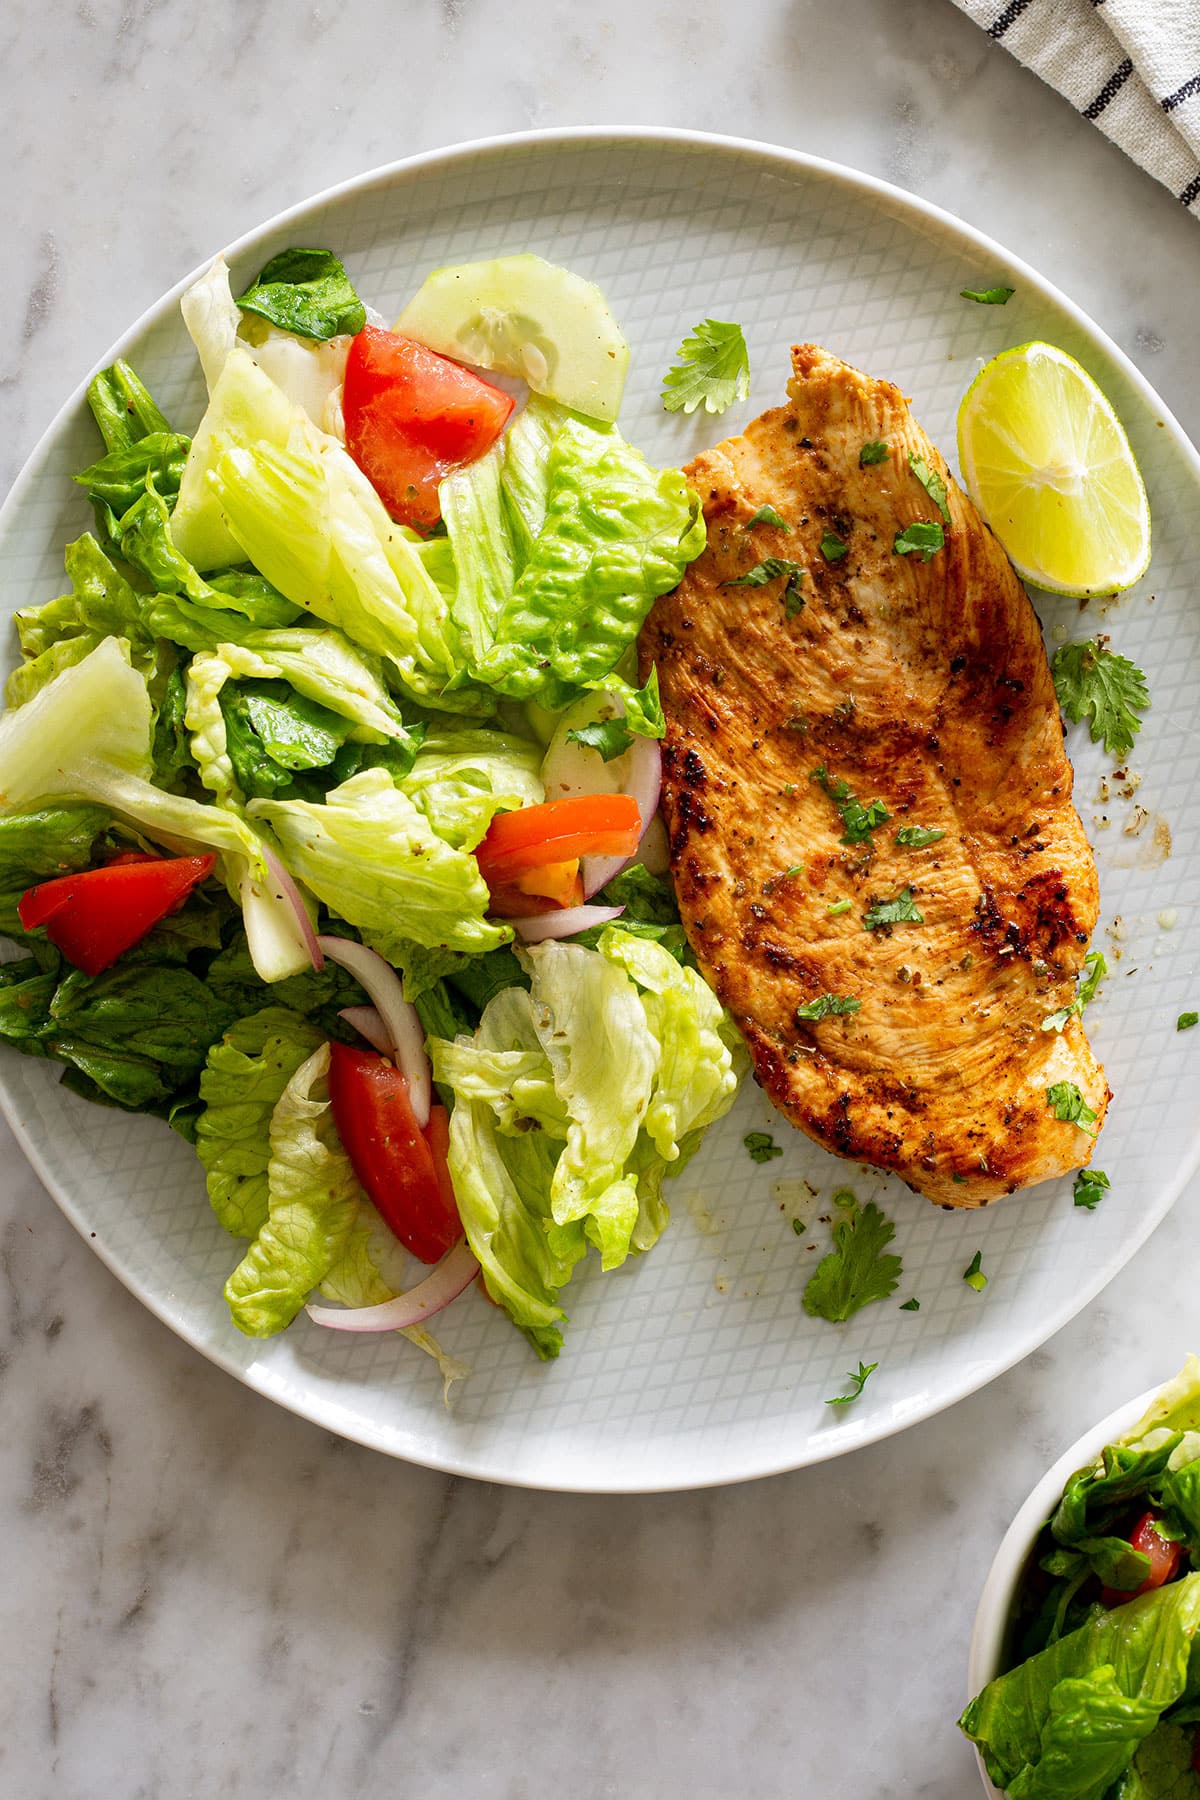 Grilled chicken breasts, known as pechugas de pollo a la plancha, on a plate with green salad.